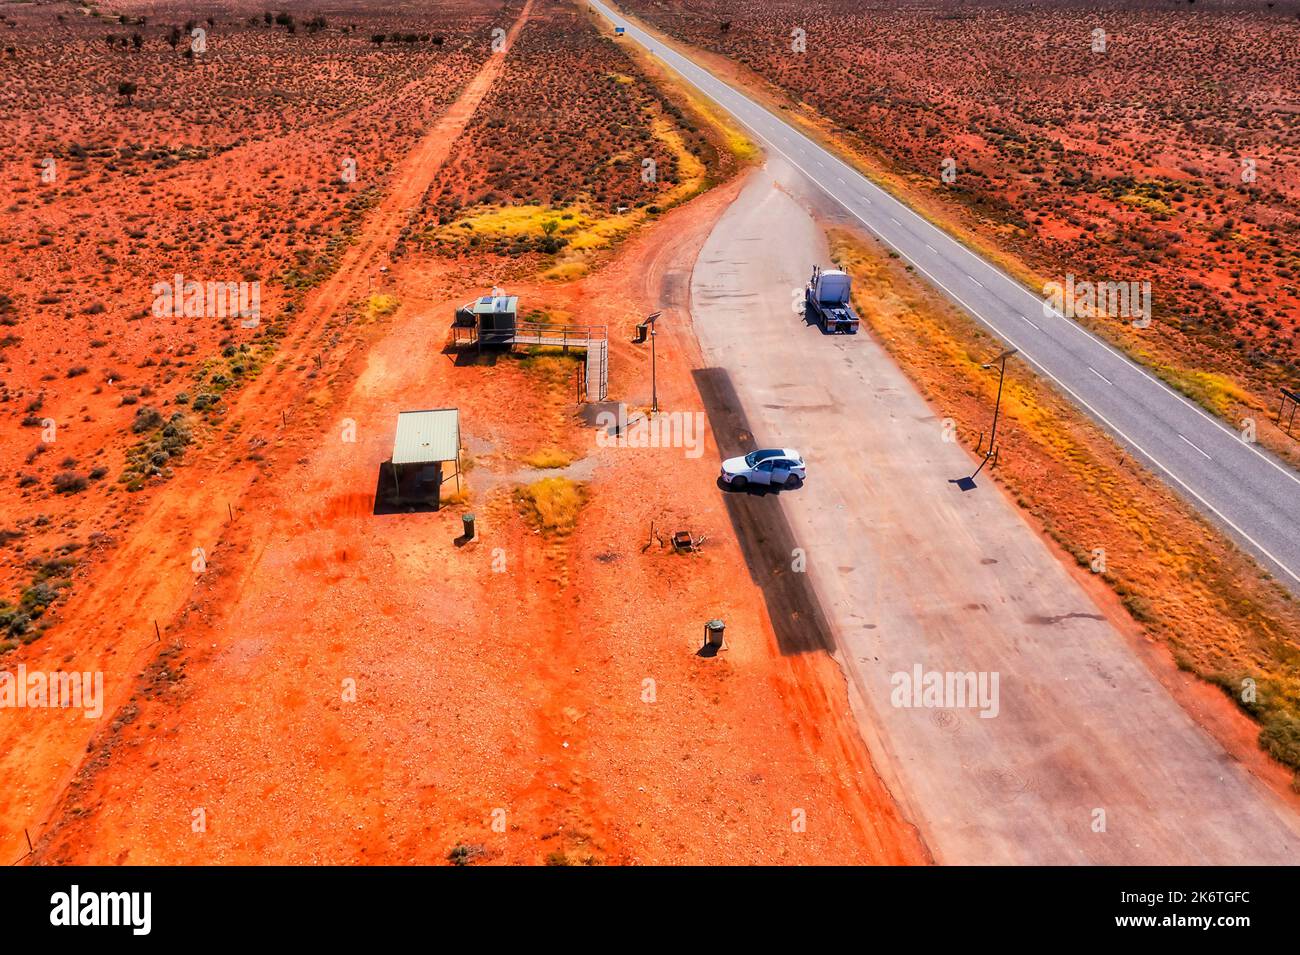 Dolo hill Rest area stop over for motor vehicles on Barrier highway A32 in australian outback. Stock Photo